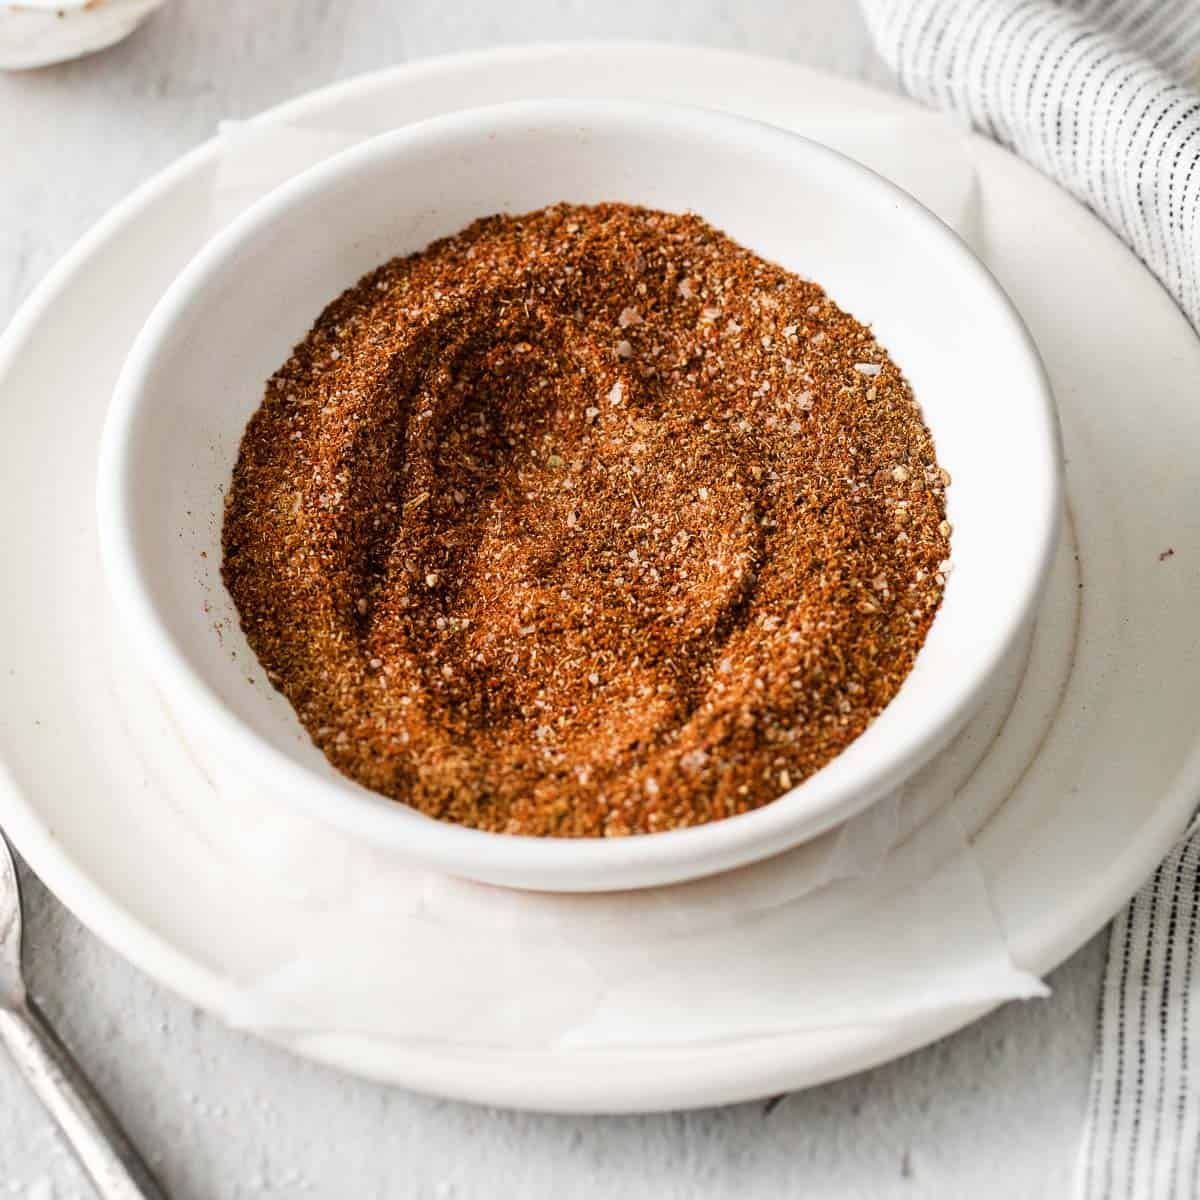 Gluten free taco seasoning tested at less than 10 ppm using Elisa  technology. High quality, non-gmo, spices kick up your cooking.